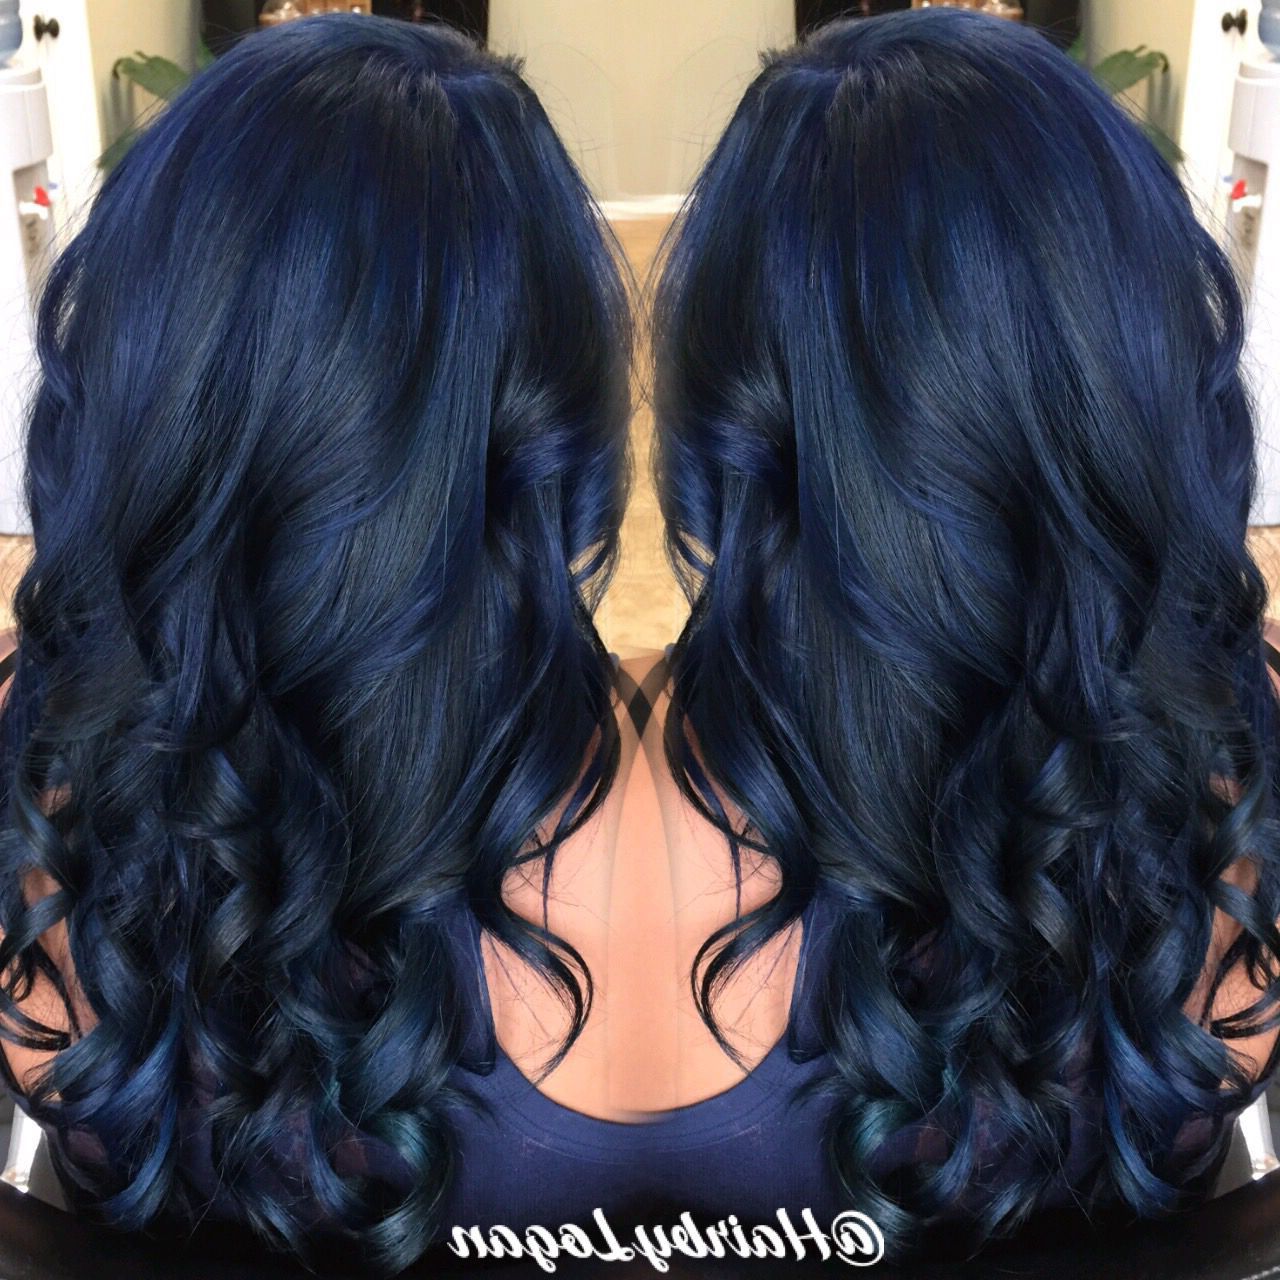 Blueberry Beauty | Vivid Hair Color, Dark Blue Hair, Hair Styles For Short Hair Hairstyles With Blueberry Balayage (View 6 of 20)